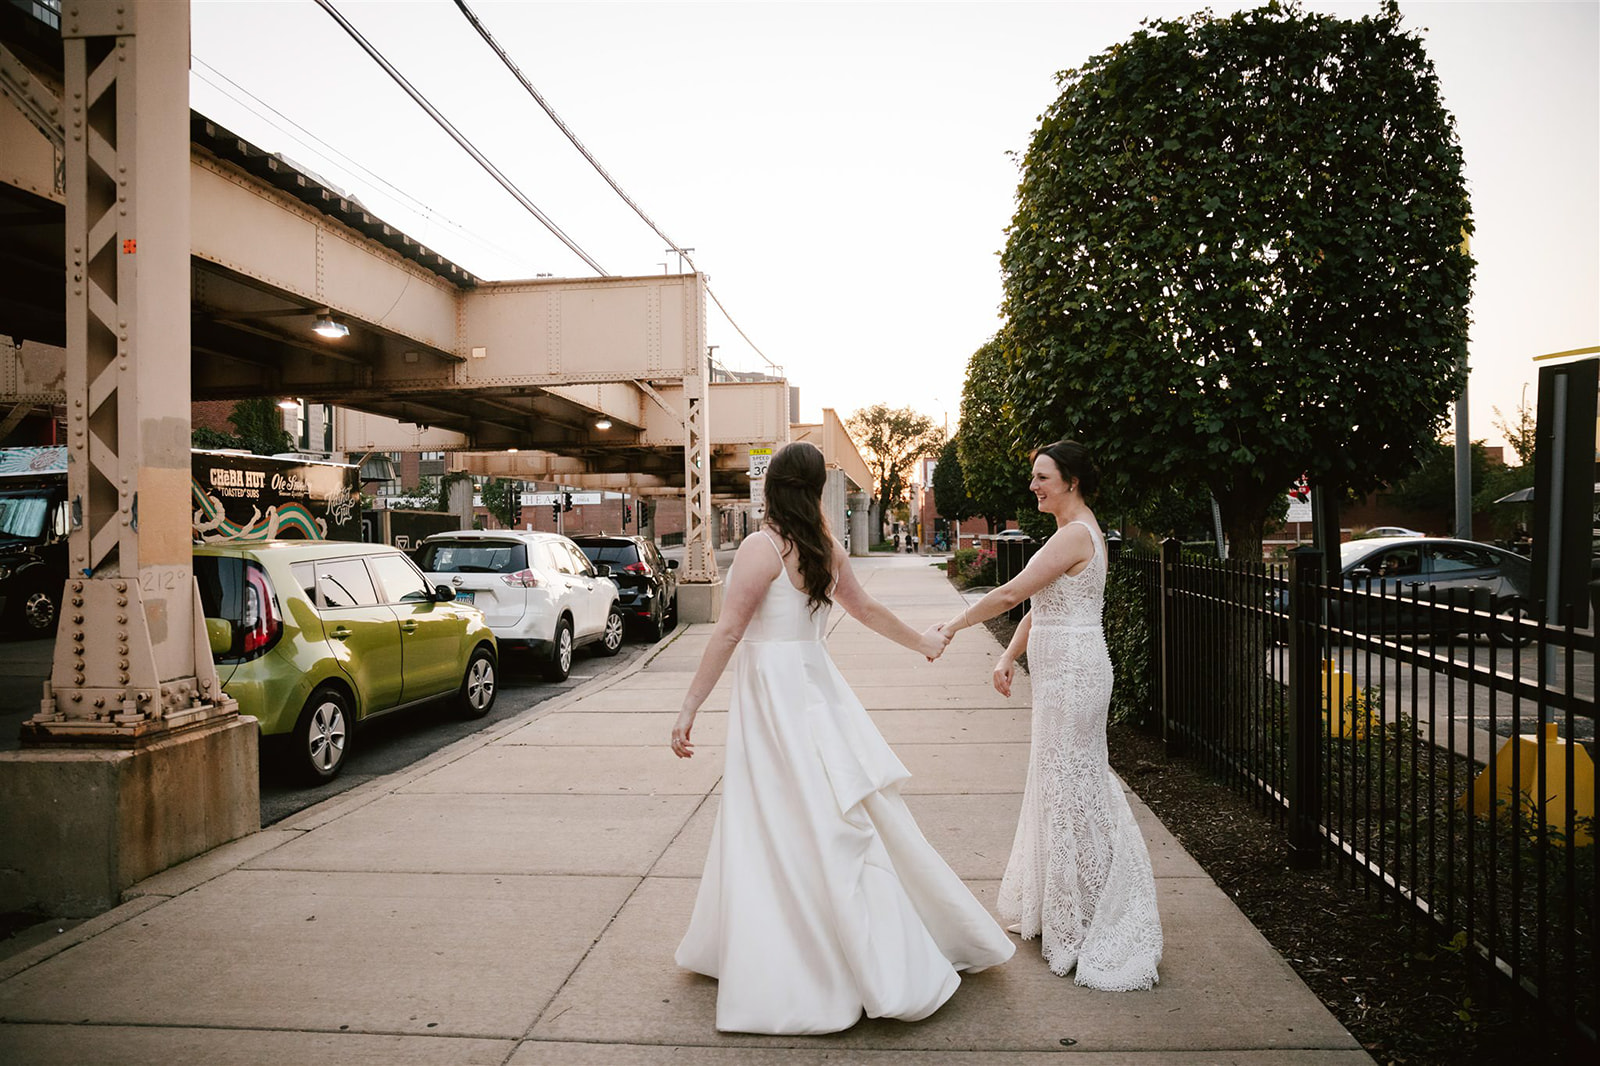 Two brides against a Chicago street at sunset, showcasing the stunning cityscape and their radiant joy on their wedding.